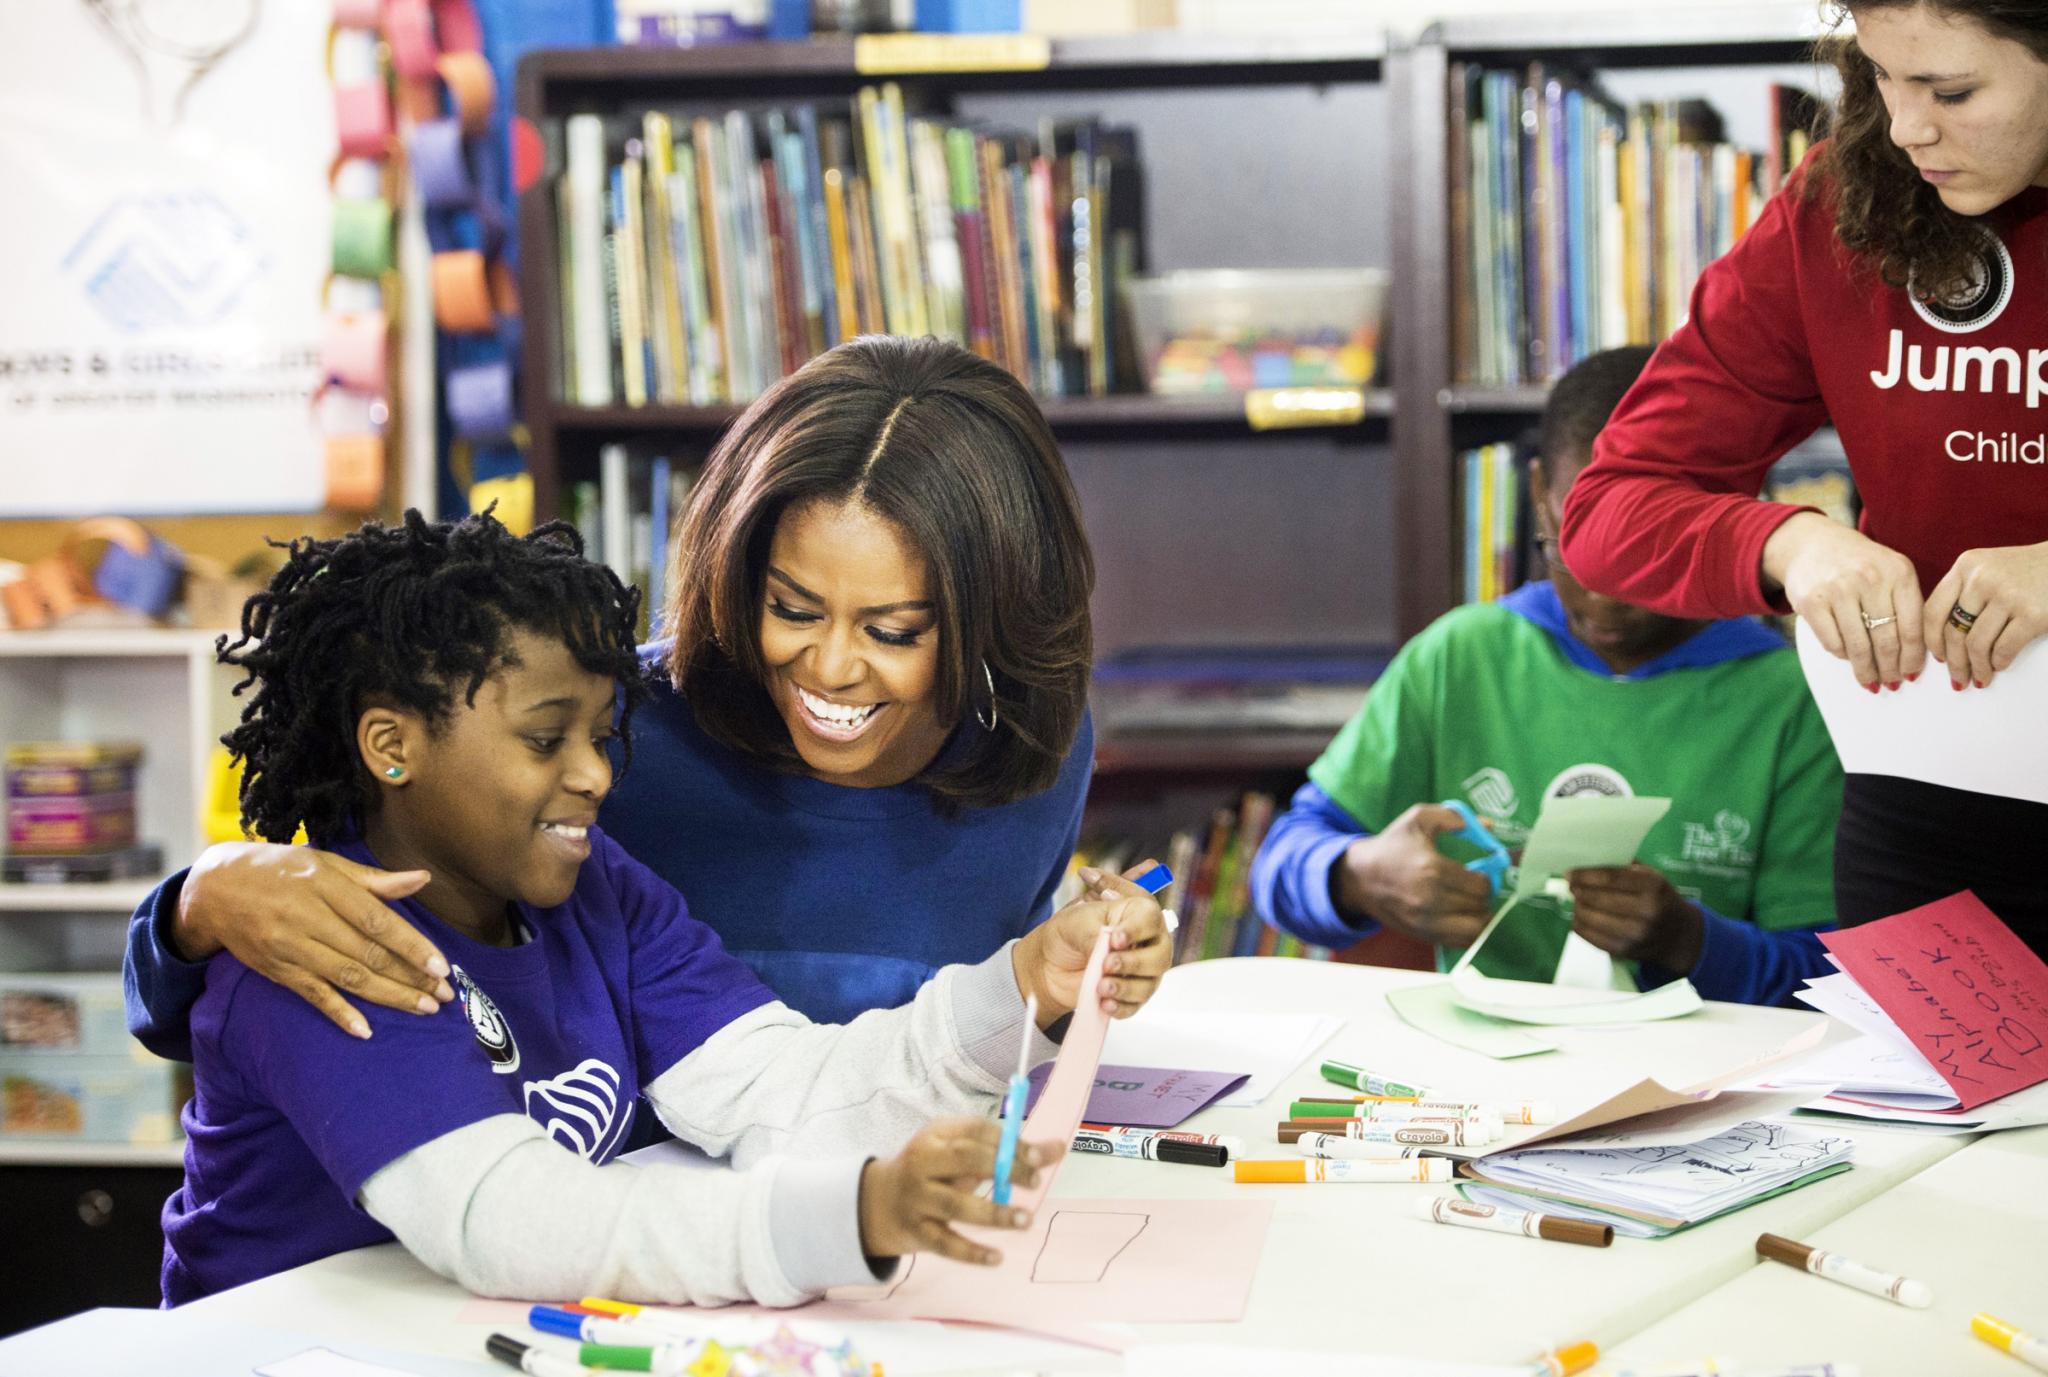 Michelle Obama Launches Initiative to Make Education Accessible to All Girls
